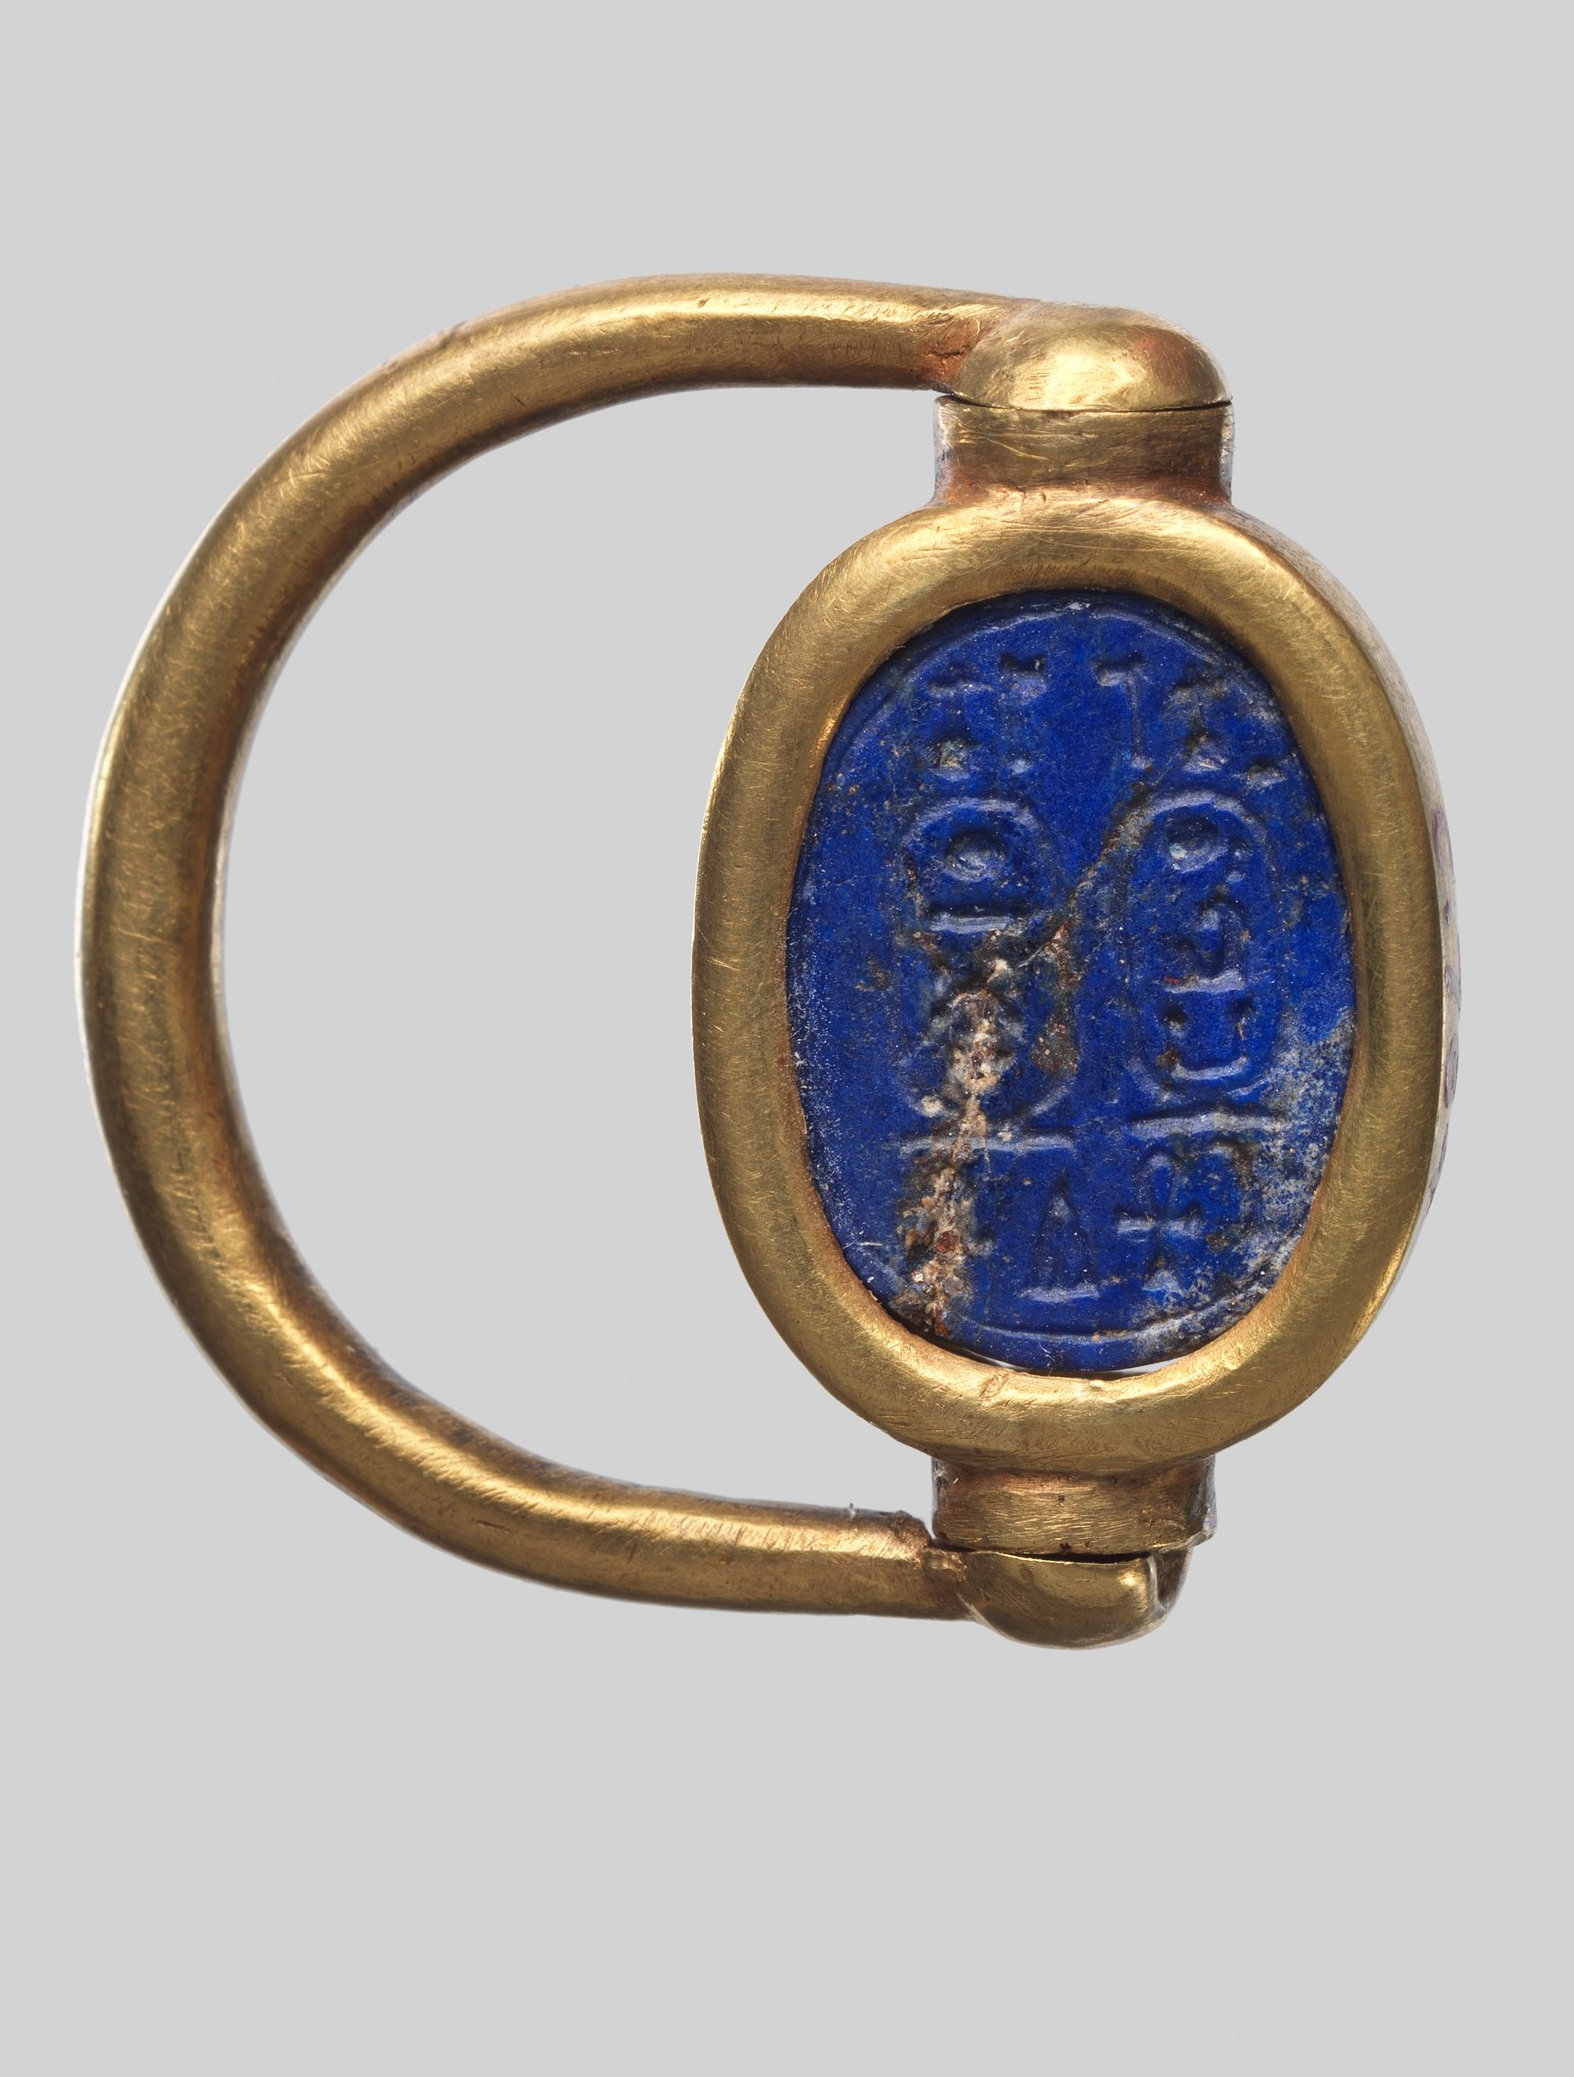 Scarab ring reverse showing the underside seal. It could be impressed onto mud sealings that sealed documents or the contents of bags and chests. Metropolitan Museum of Art. 